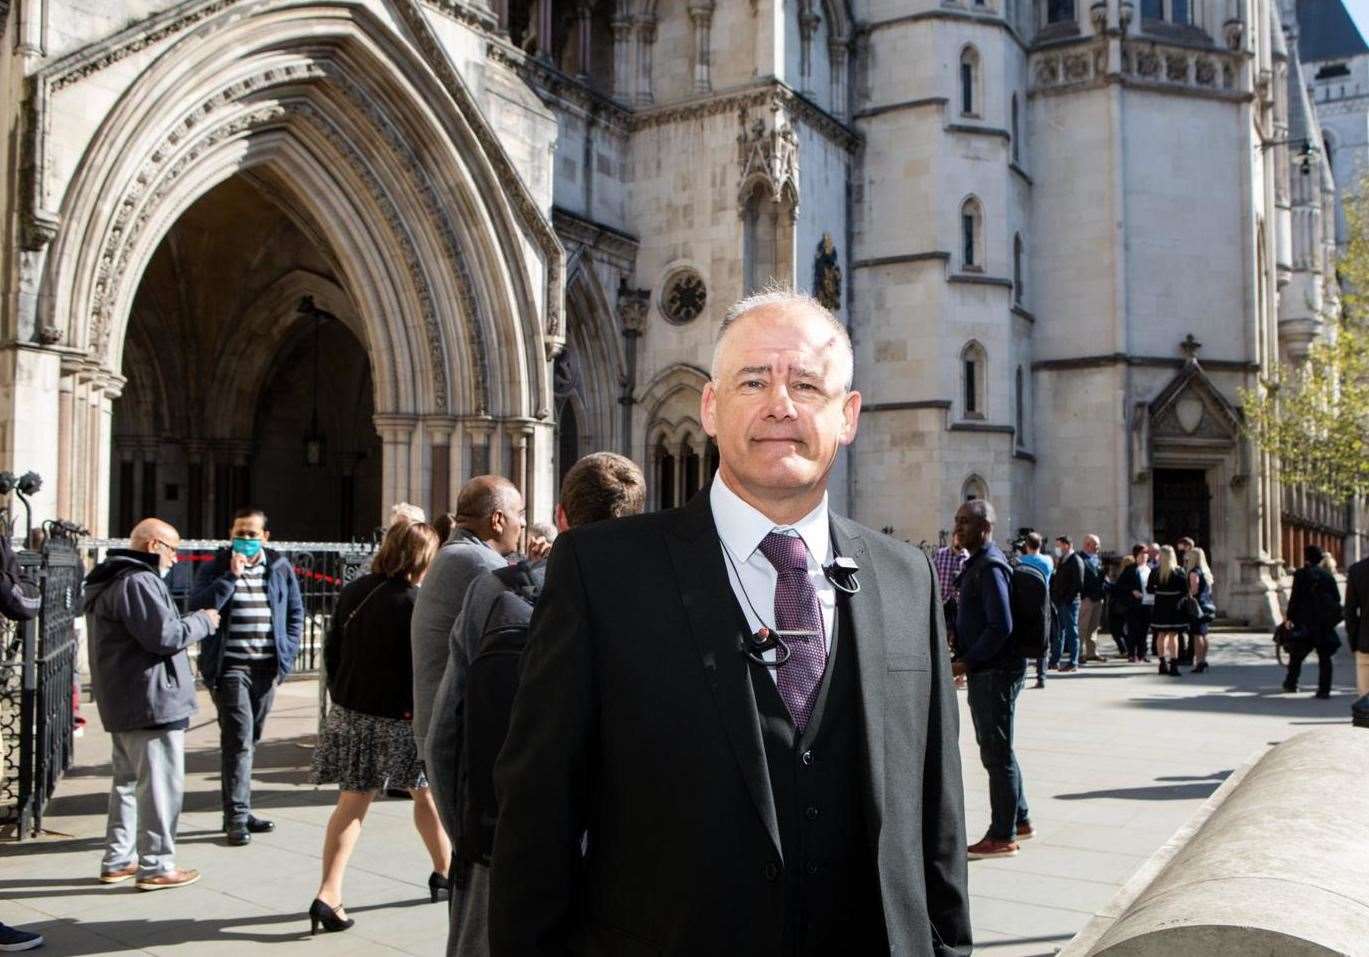 William Graham at court in London for today's hearing